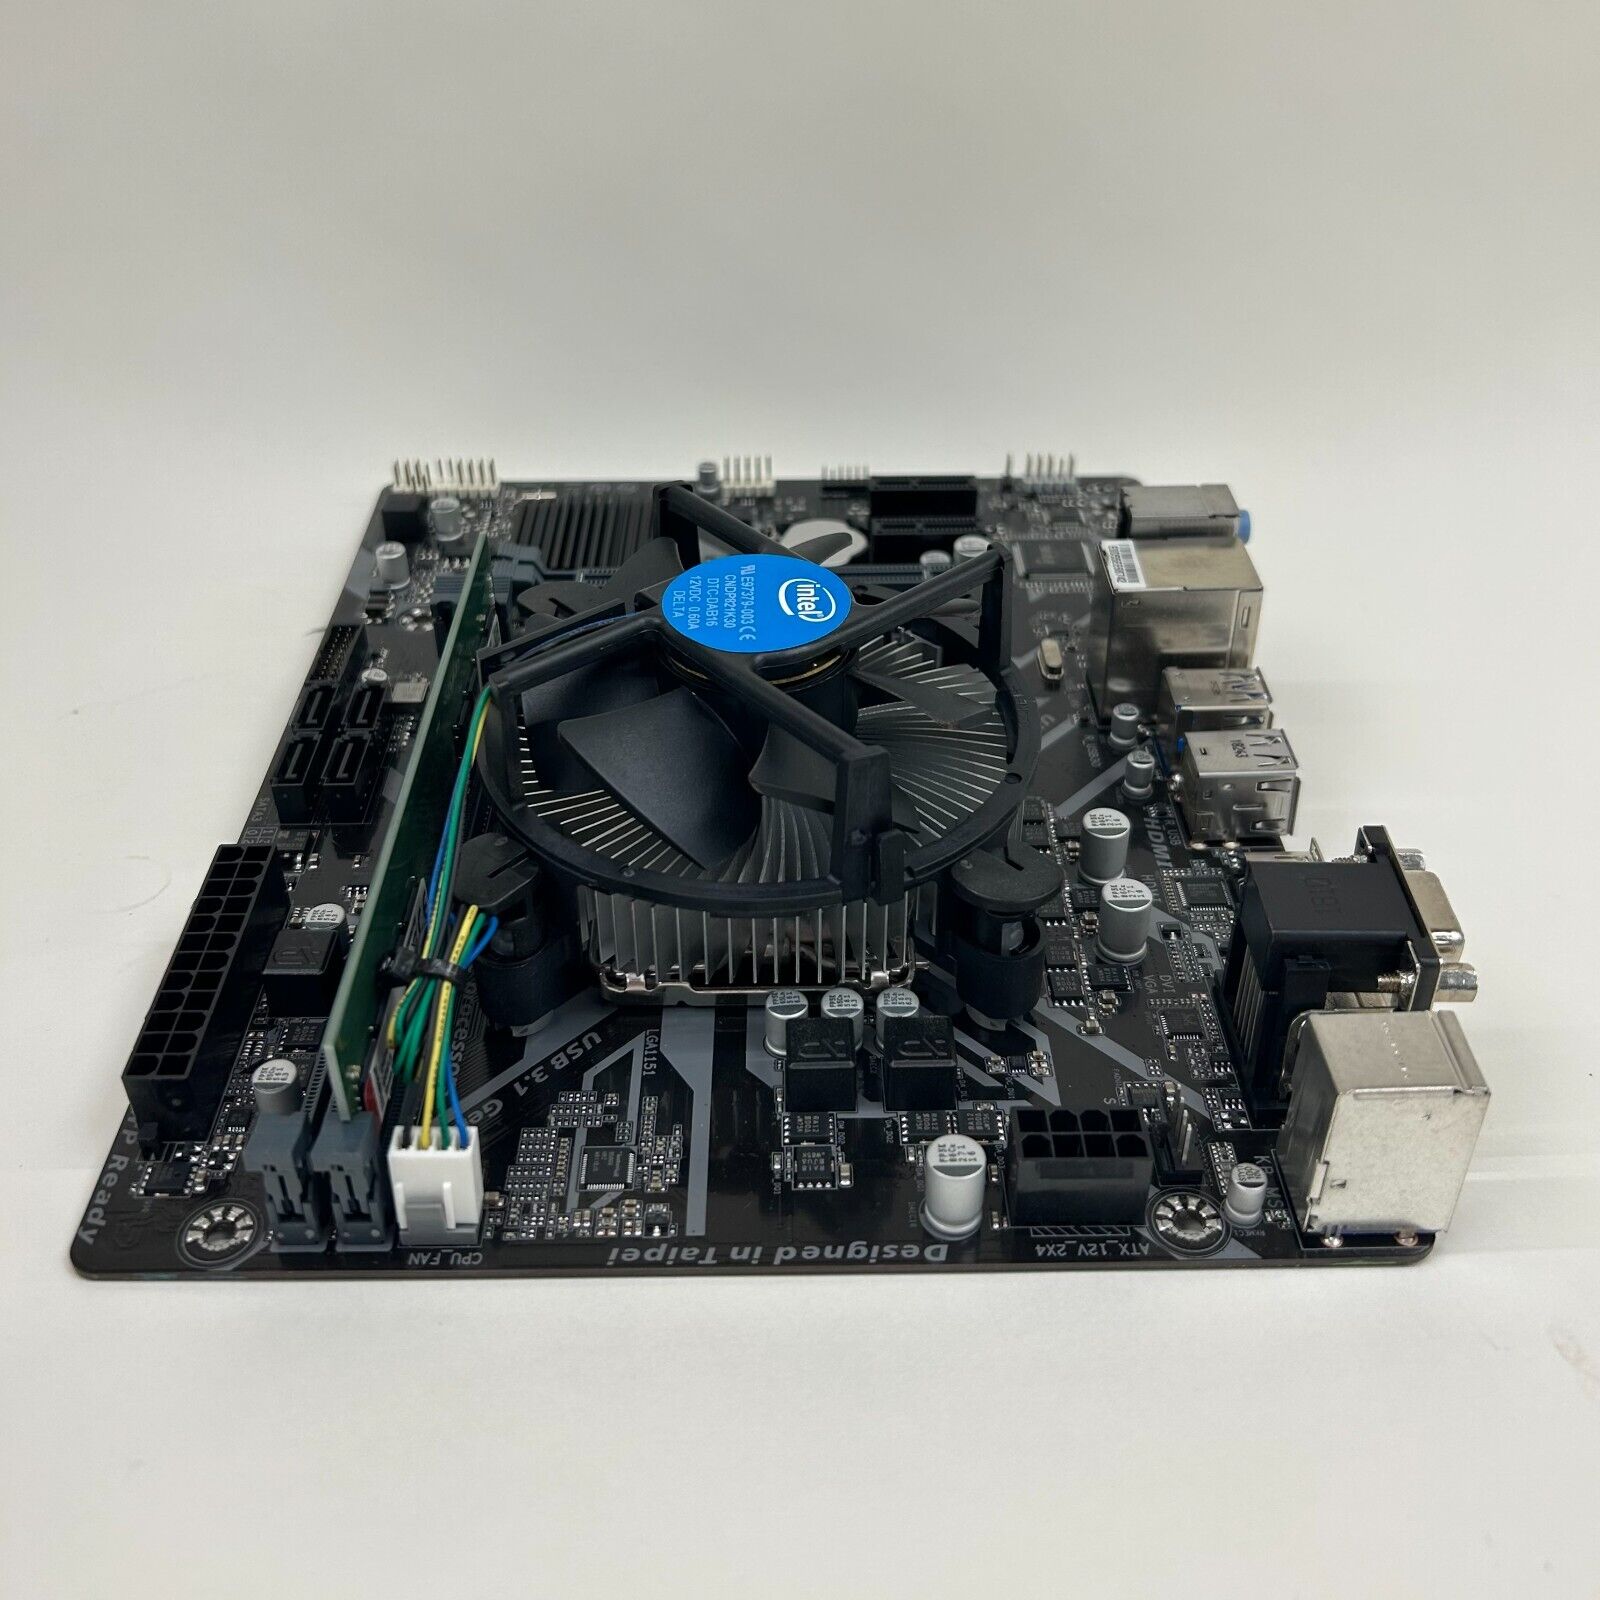 Gigabyte M-ATX motherboard with Intel Core i3 8100 CPU and 8GB DDR4 RAM